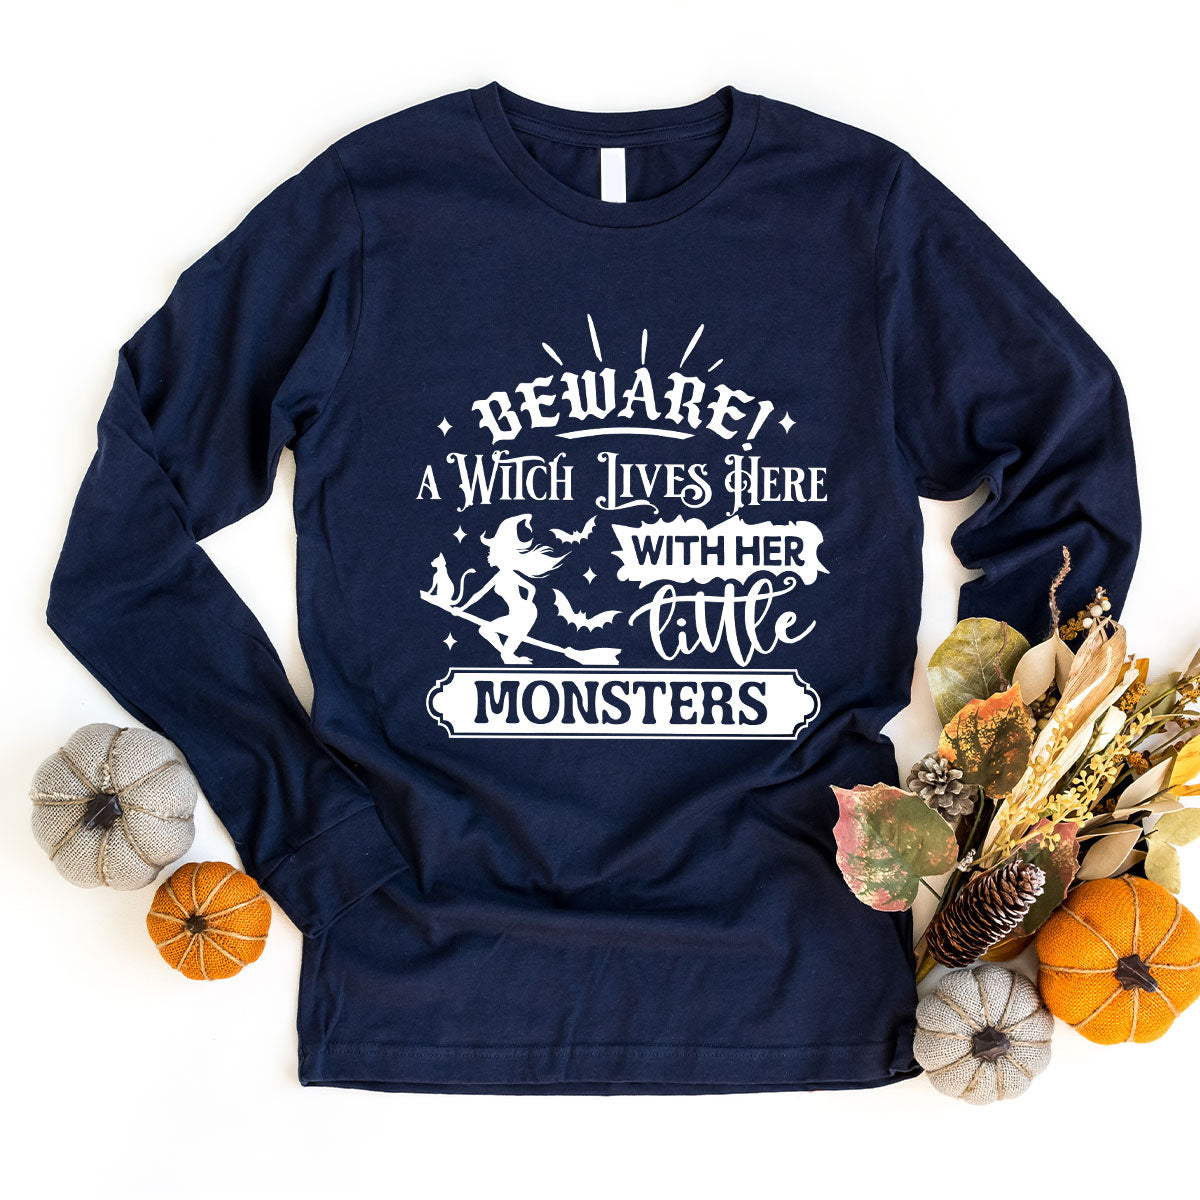 Spooky Season Shirts, Halloween Tshirts, Kids Graphic Tees, Hocus Pocus Vneck Clothing, Gift For Friend, Genderneutral Adult T-Shirt